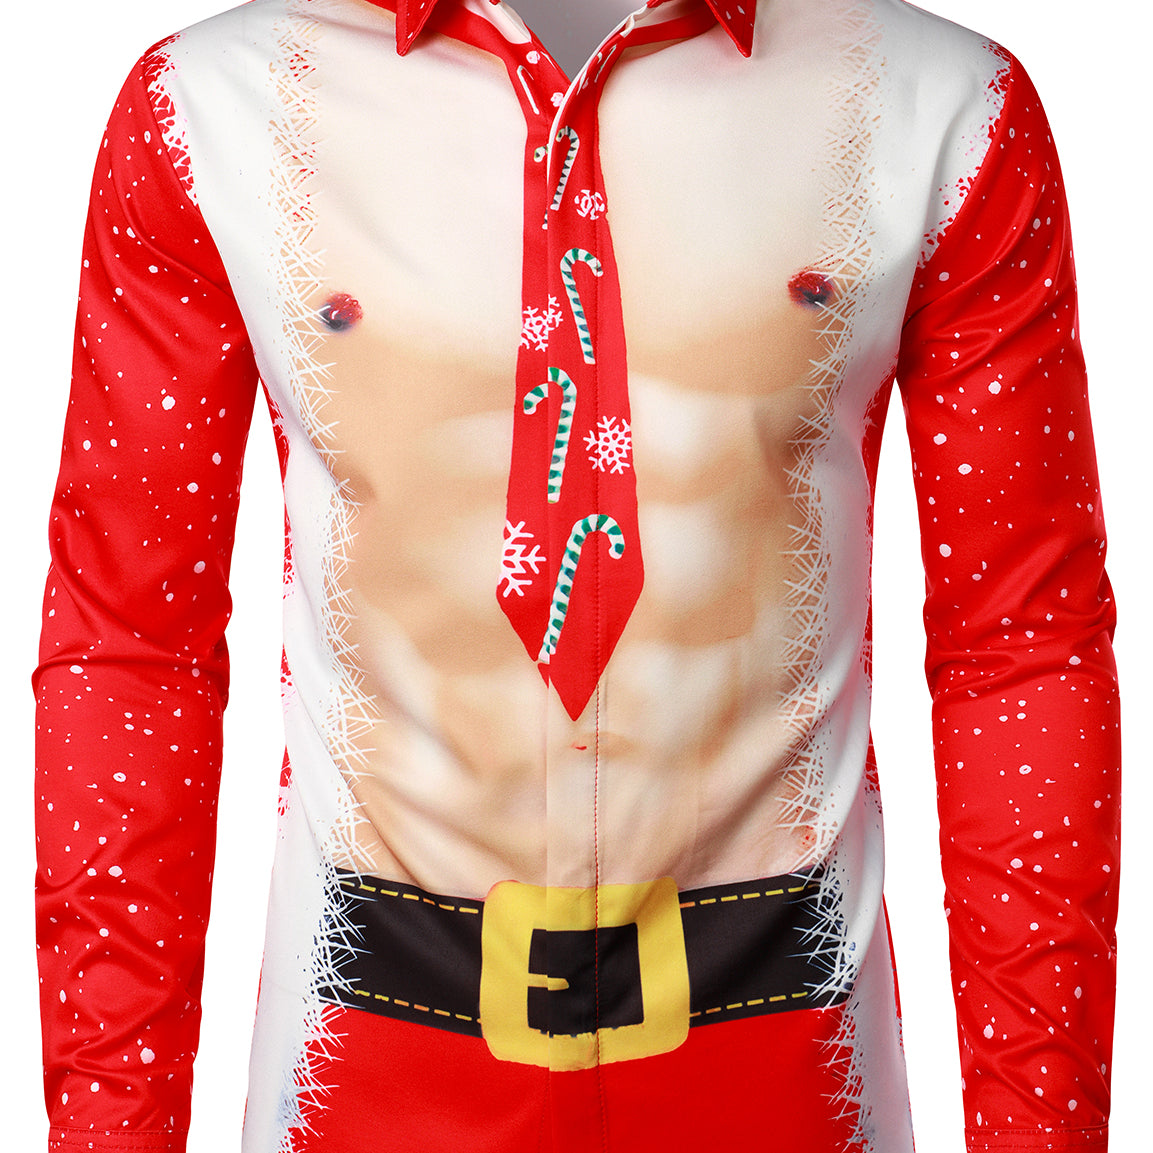 Men's Christmas Themed Santa Claus Muscle Funny Print Costume Red Lapel Long Sleeve Shirt